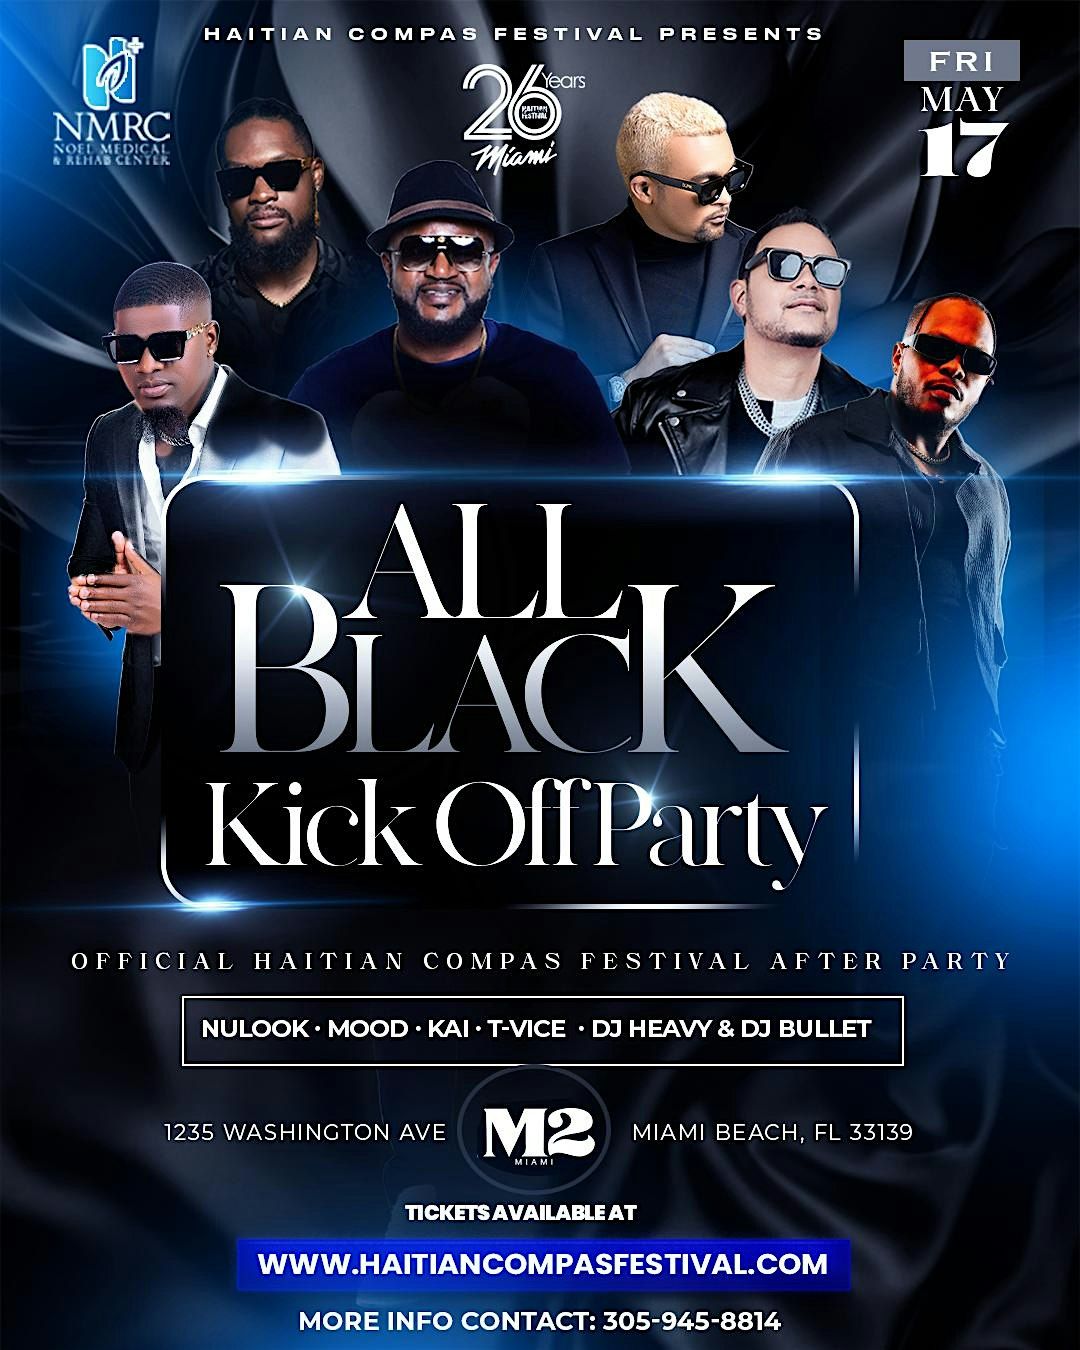 All Black Kick Off Party